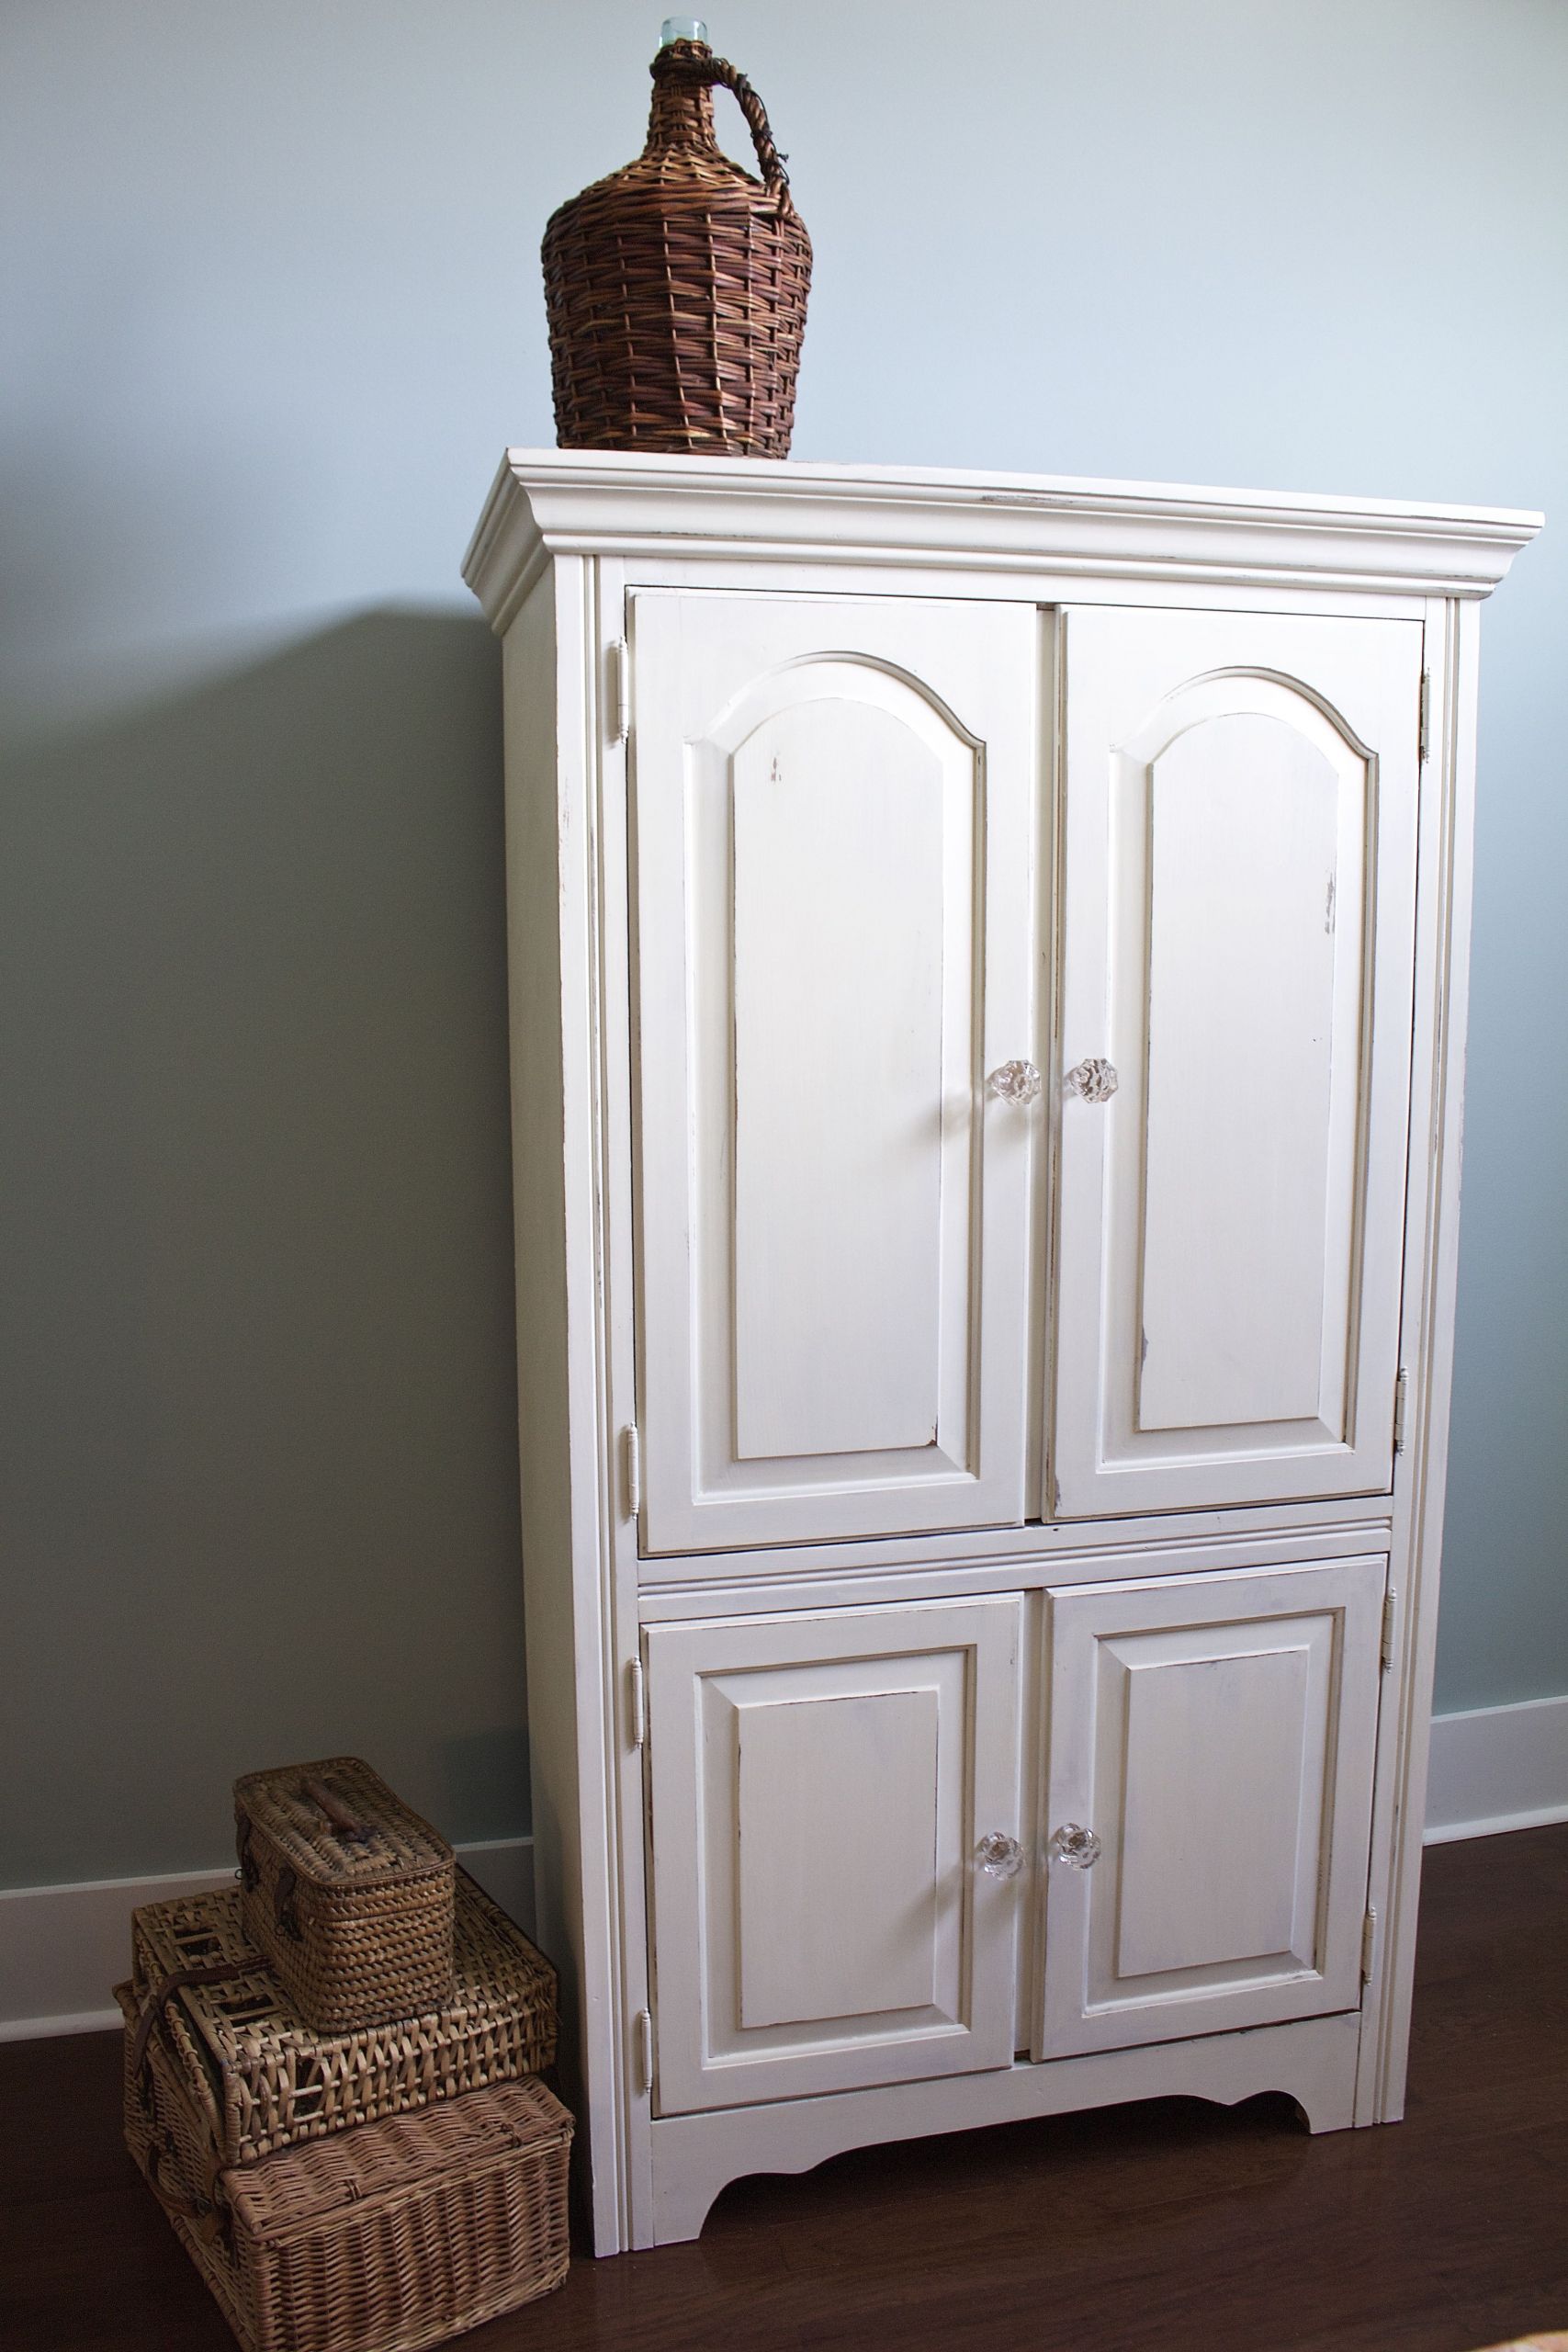 Chalk Painted Bedroom Furniture
 Chalk Painted Armoire Makeover 2 Bees in a Pod